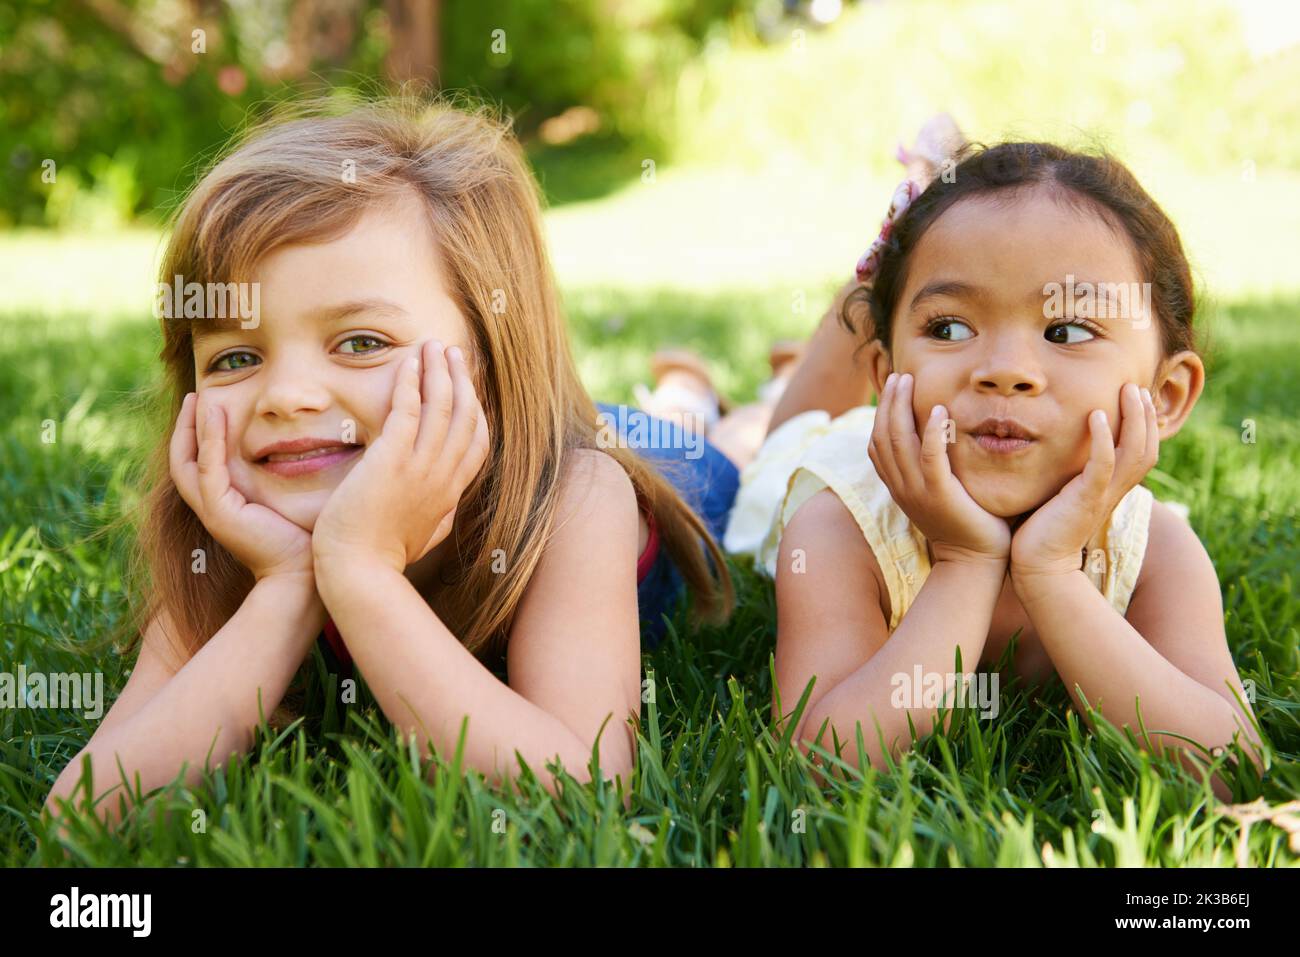 Wiling away the summer days together. two adorable little girls lying next to each other on the grass. Stock Photo